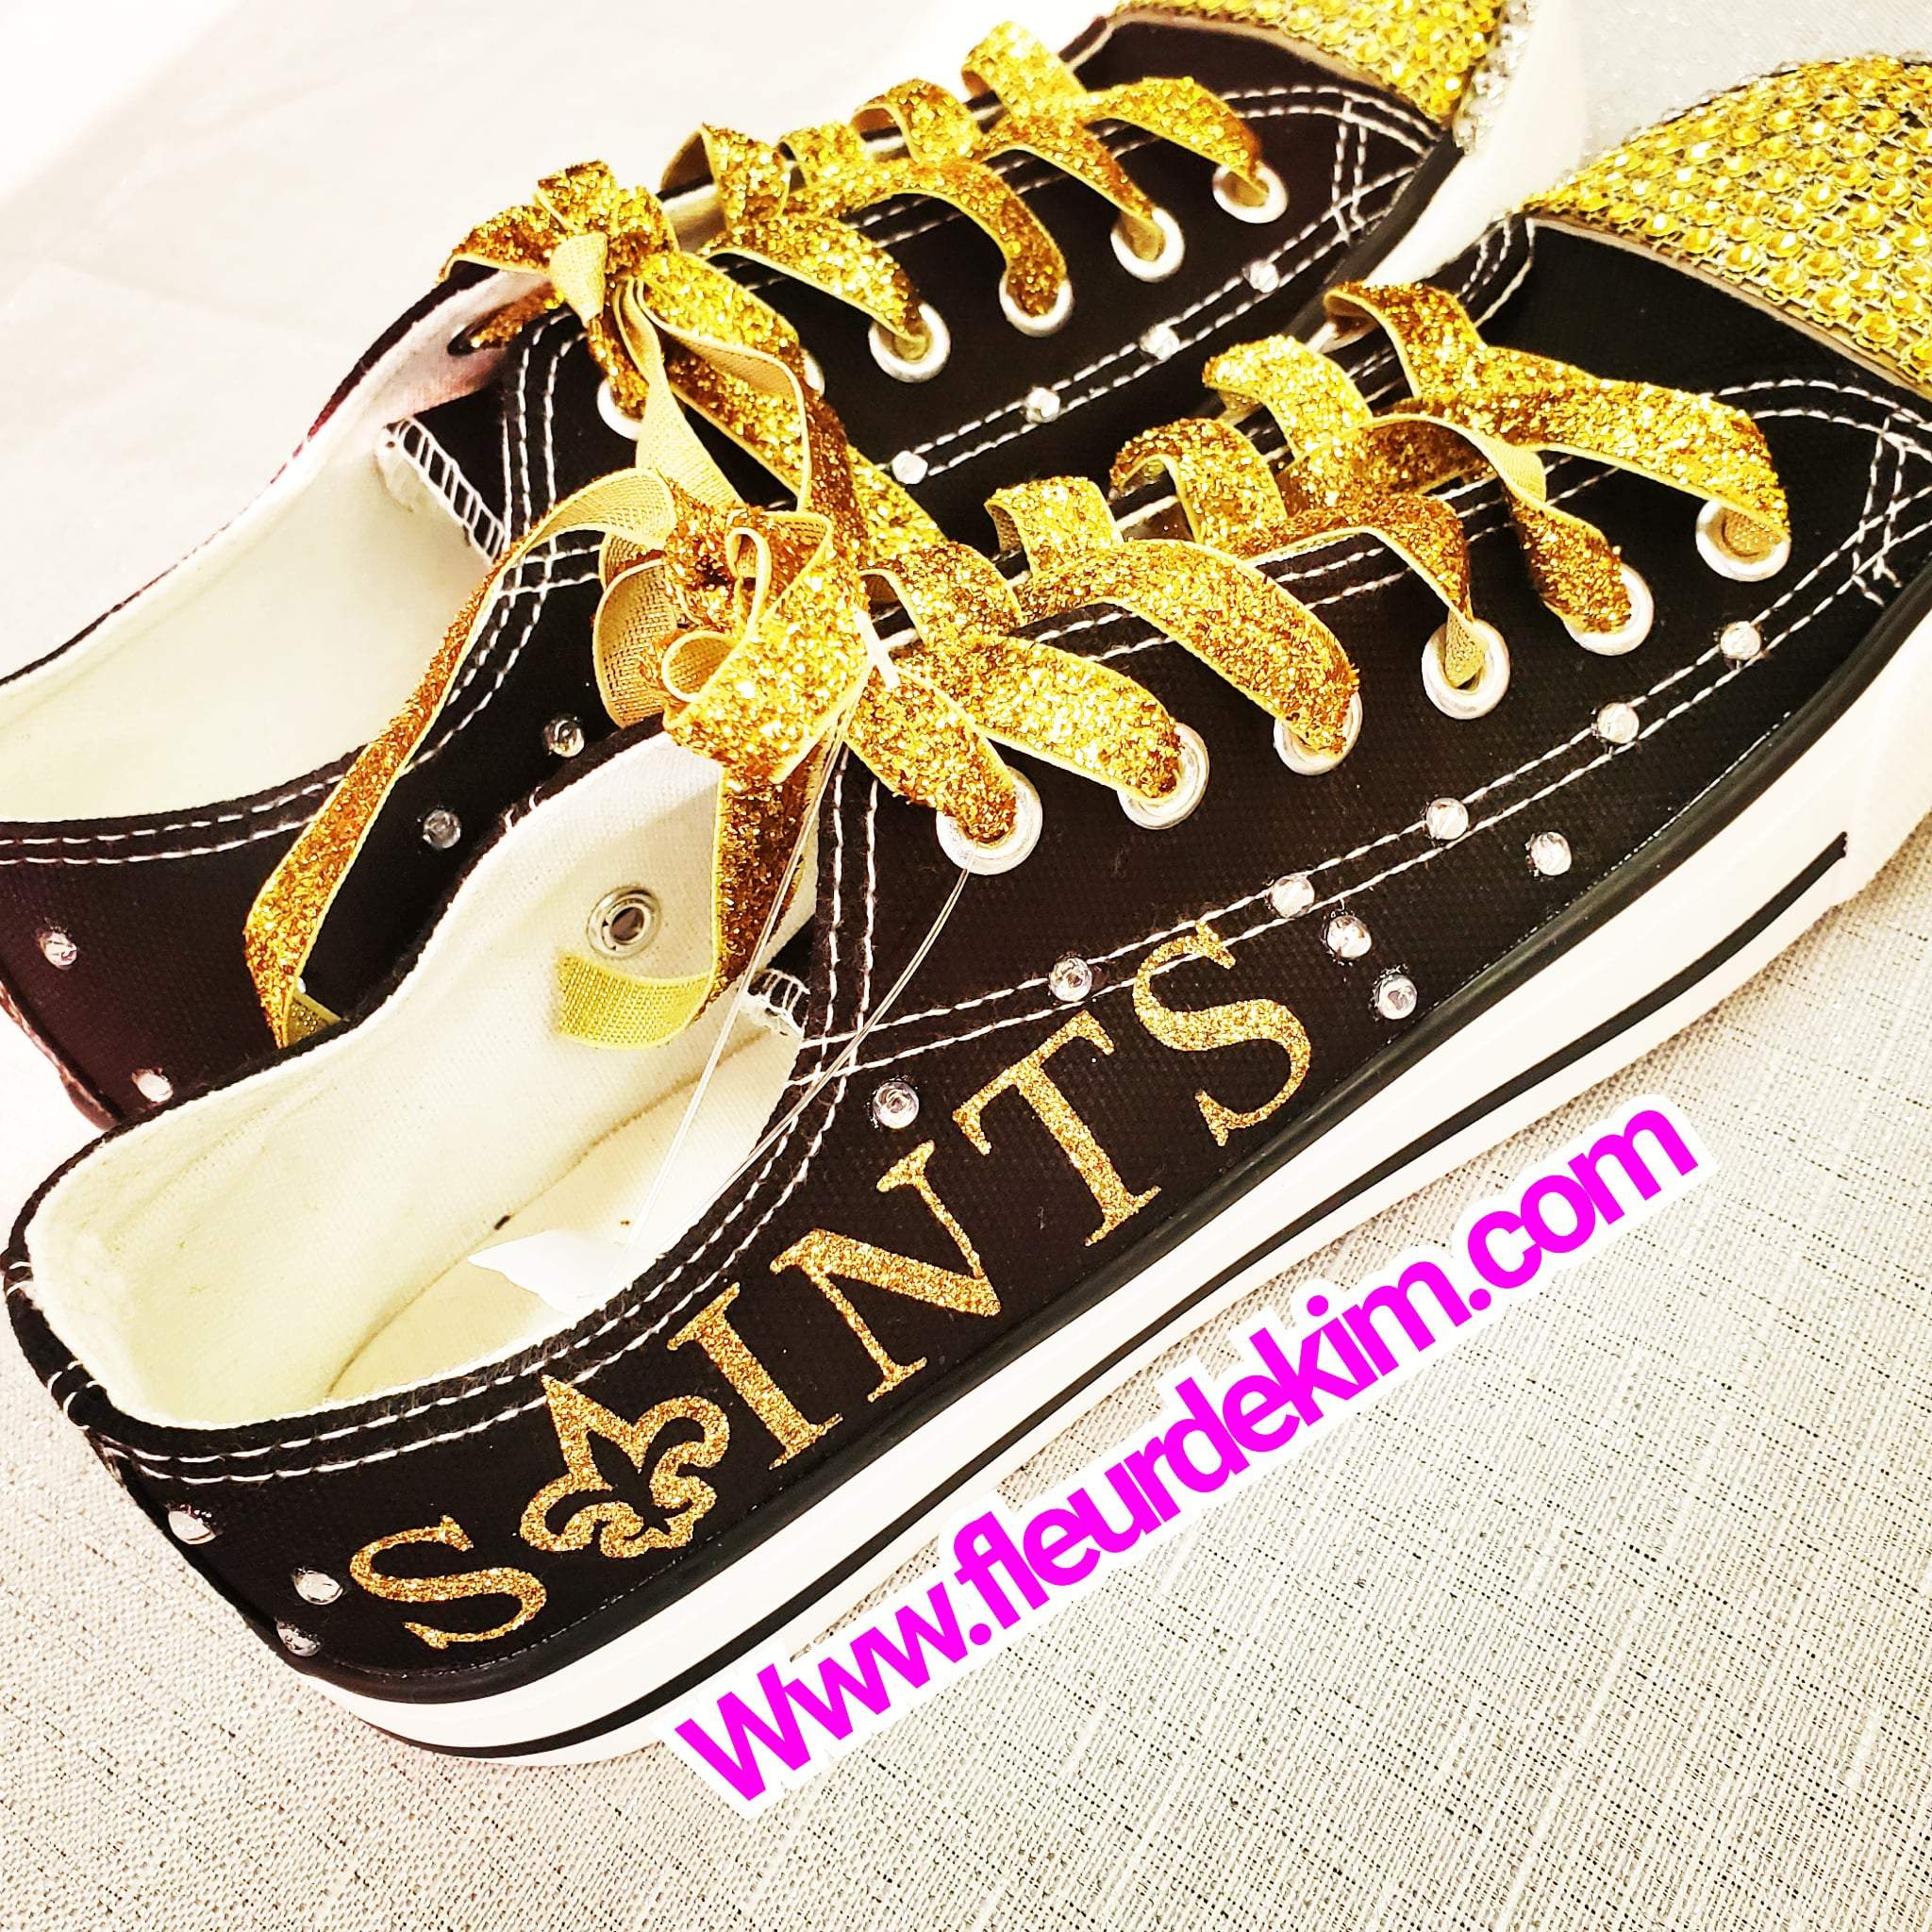 Low top tennis shoes (gold front)